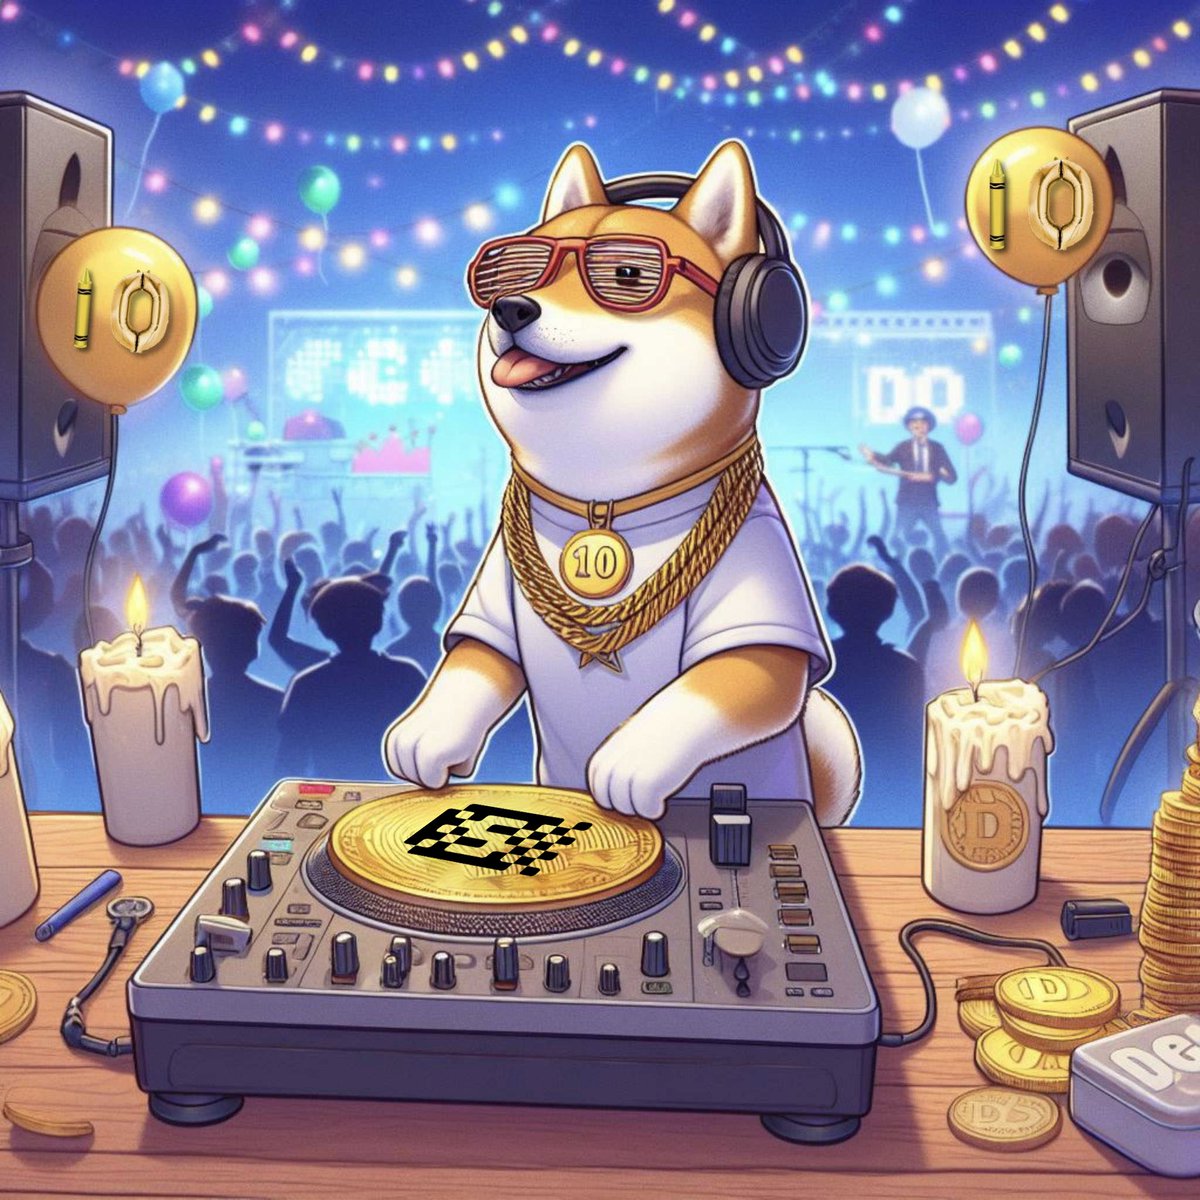 Get ready to officially groove with the psychedelic music club for @dogecoin 

#SatoshiBet #GambleFi #MemeCoinSeason #BTC